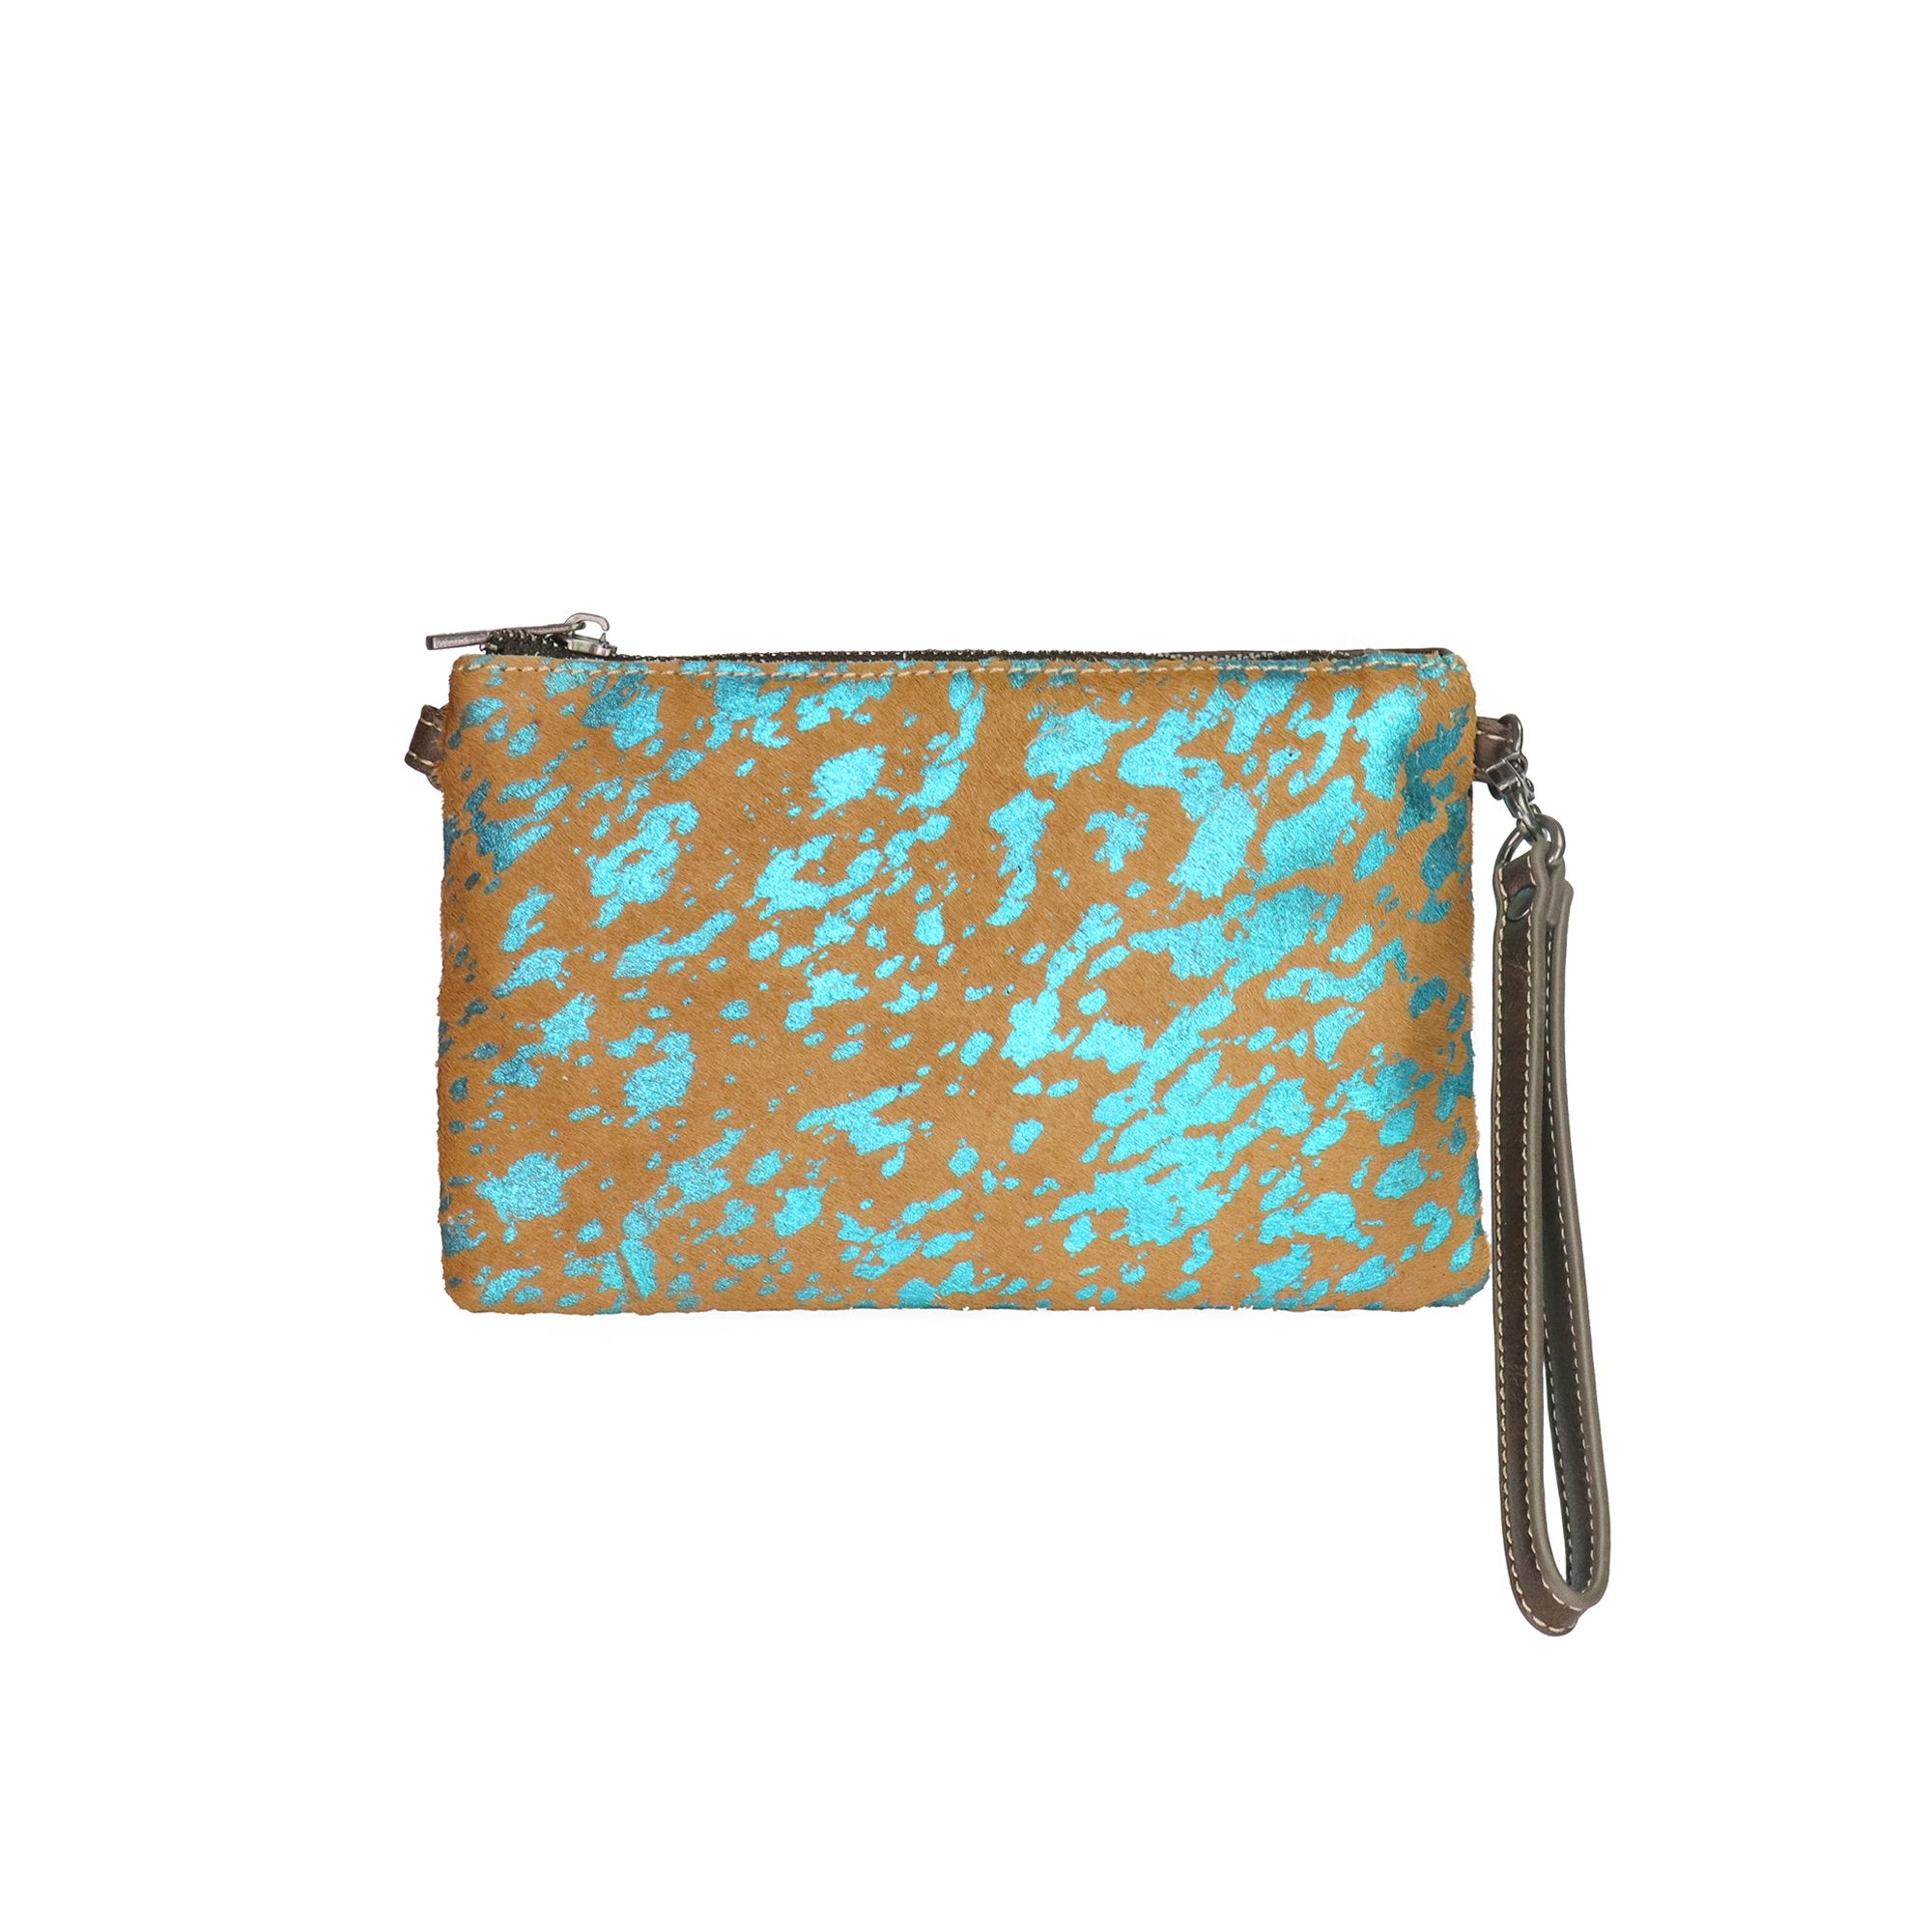 Montana West Hair-On Cowhide Leather Clutch